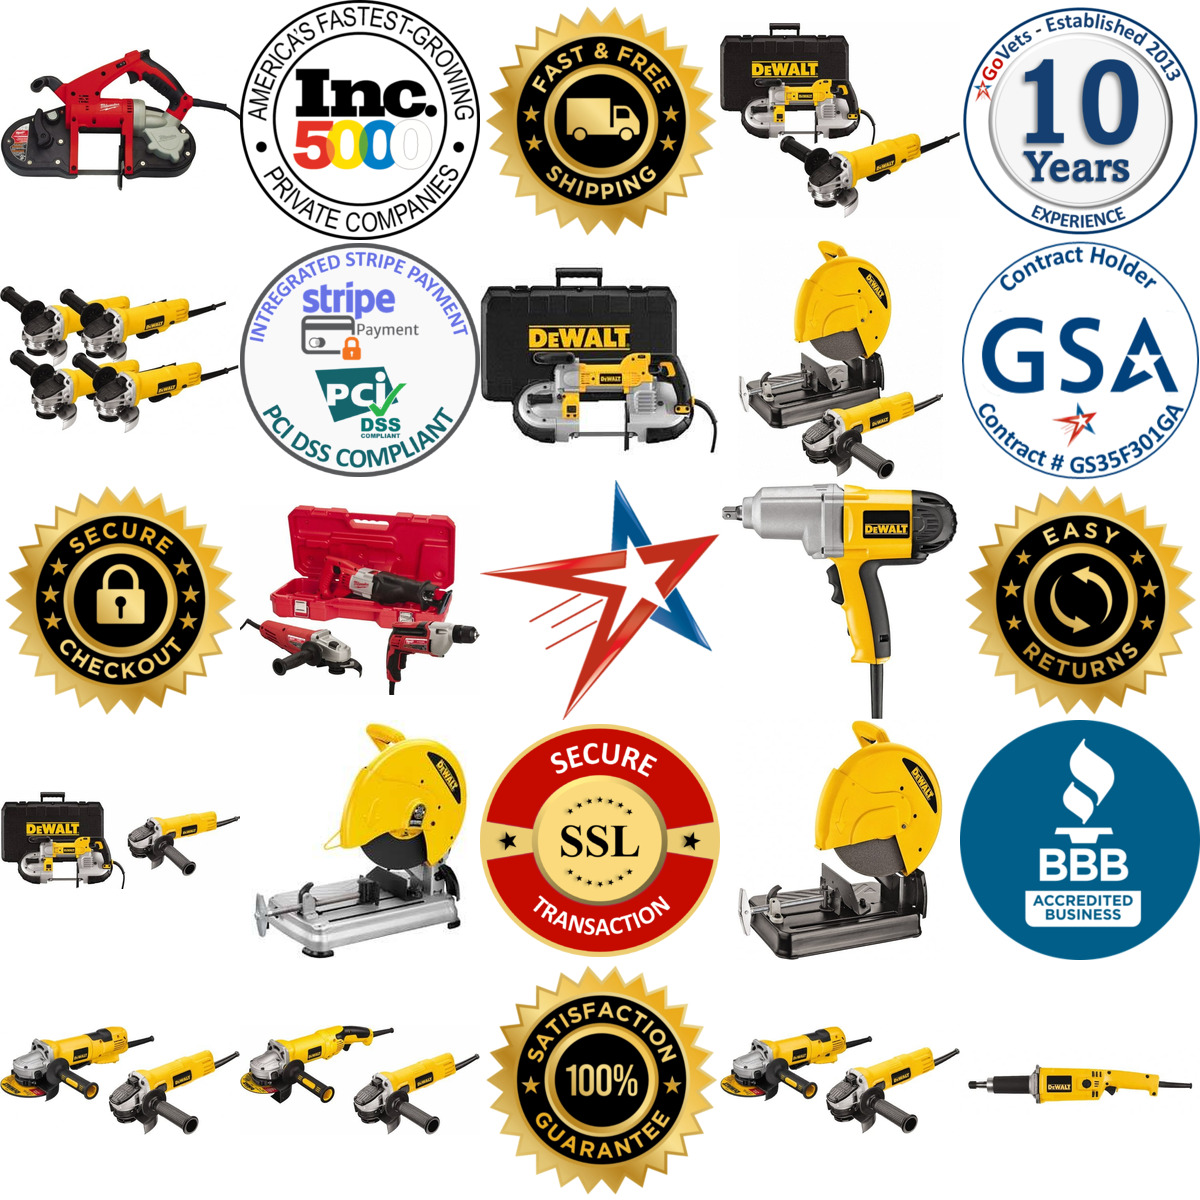 A selection of Electric Tool Combination Kits products on GoVets